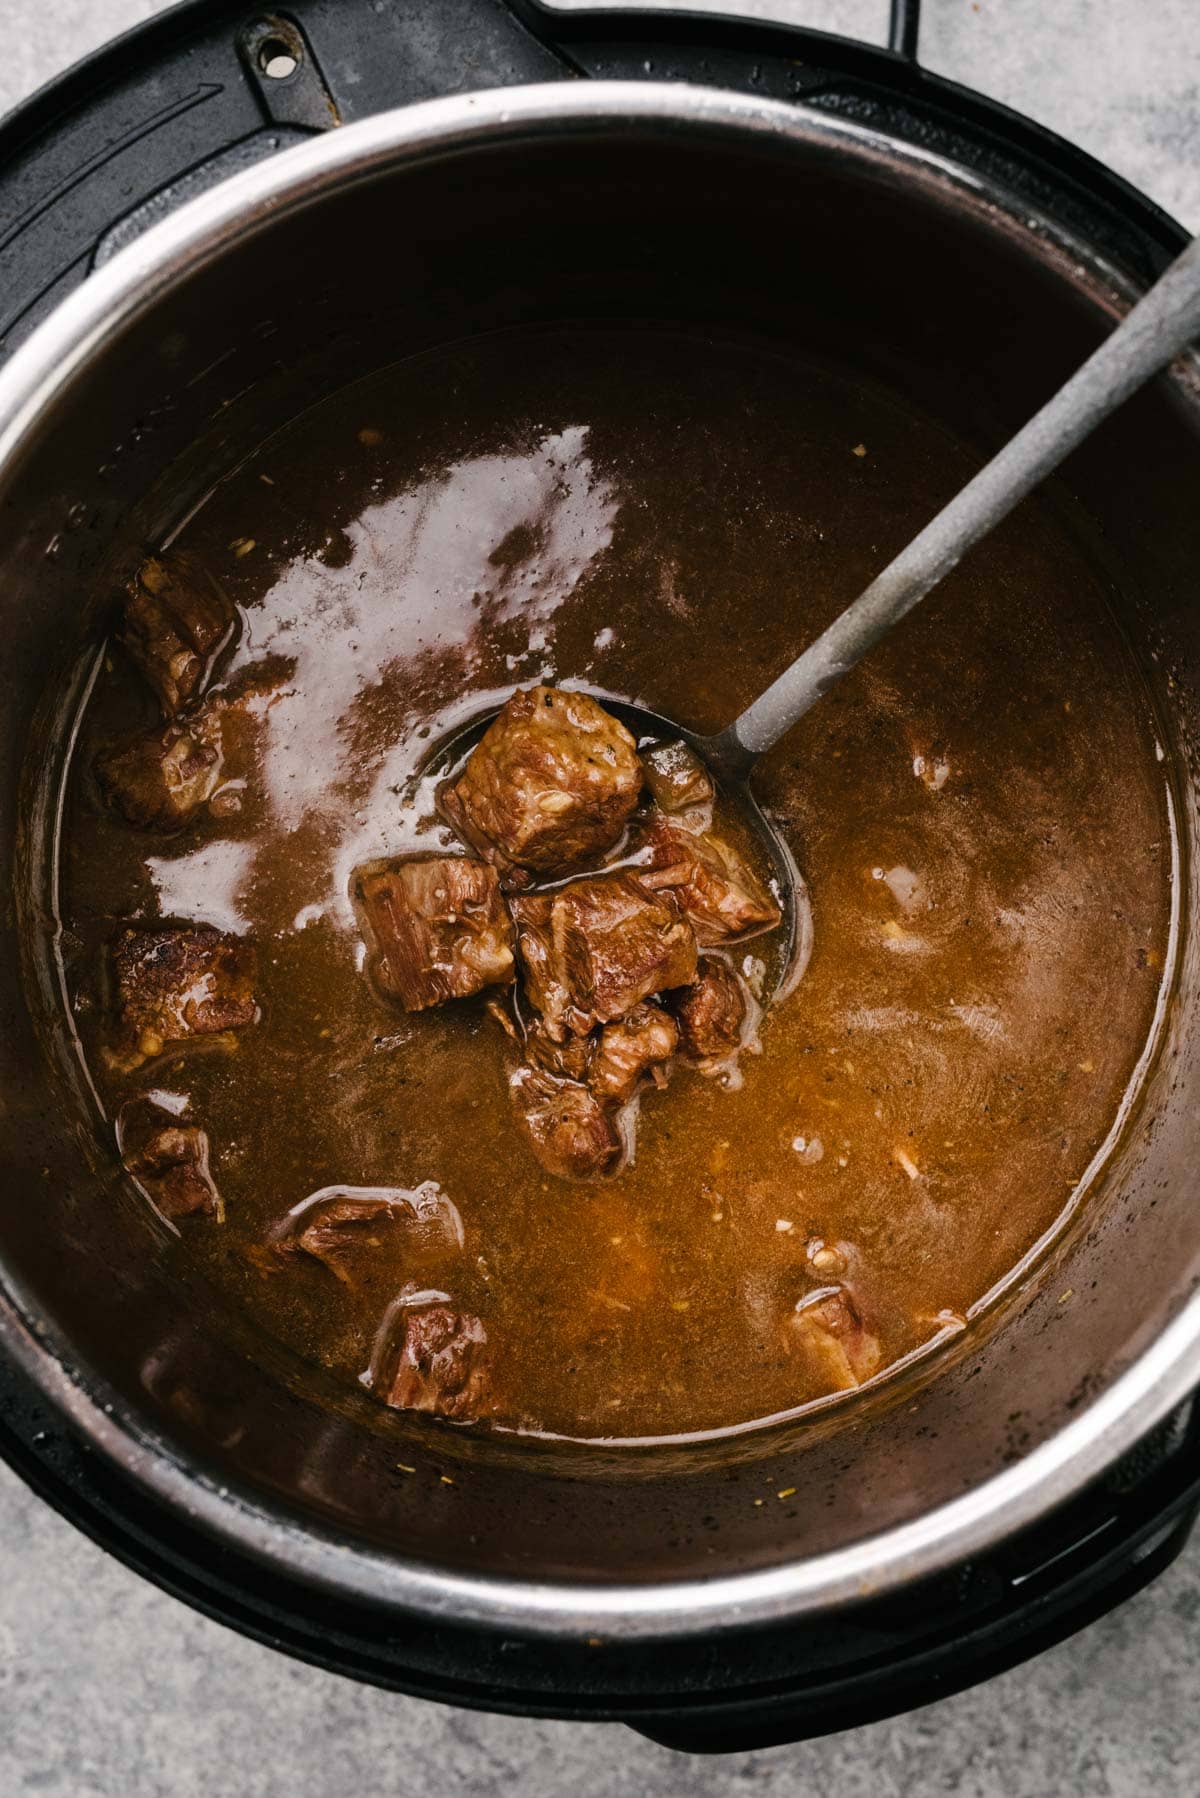 A ladle tucked into an Instant Pot showing tender pieces of beef tips swimming in a rich, thick gravy.